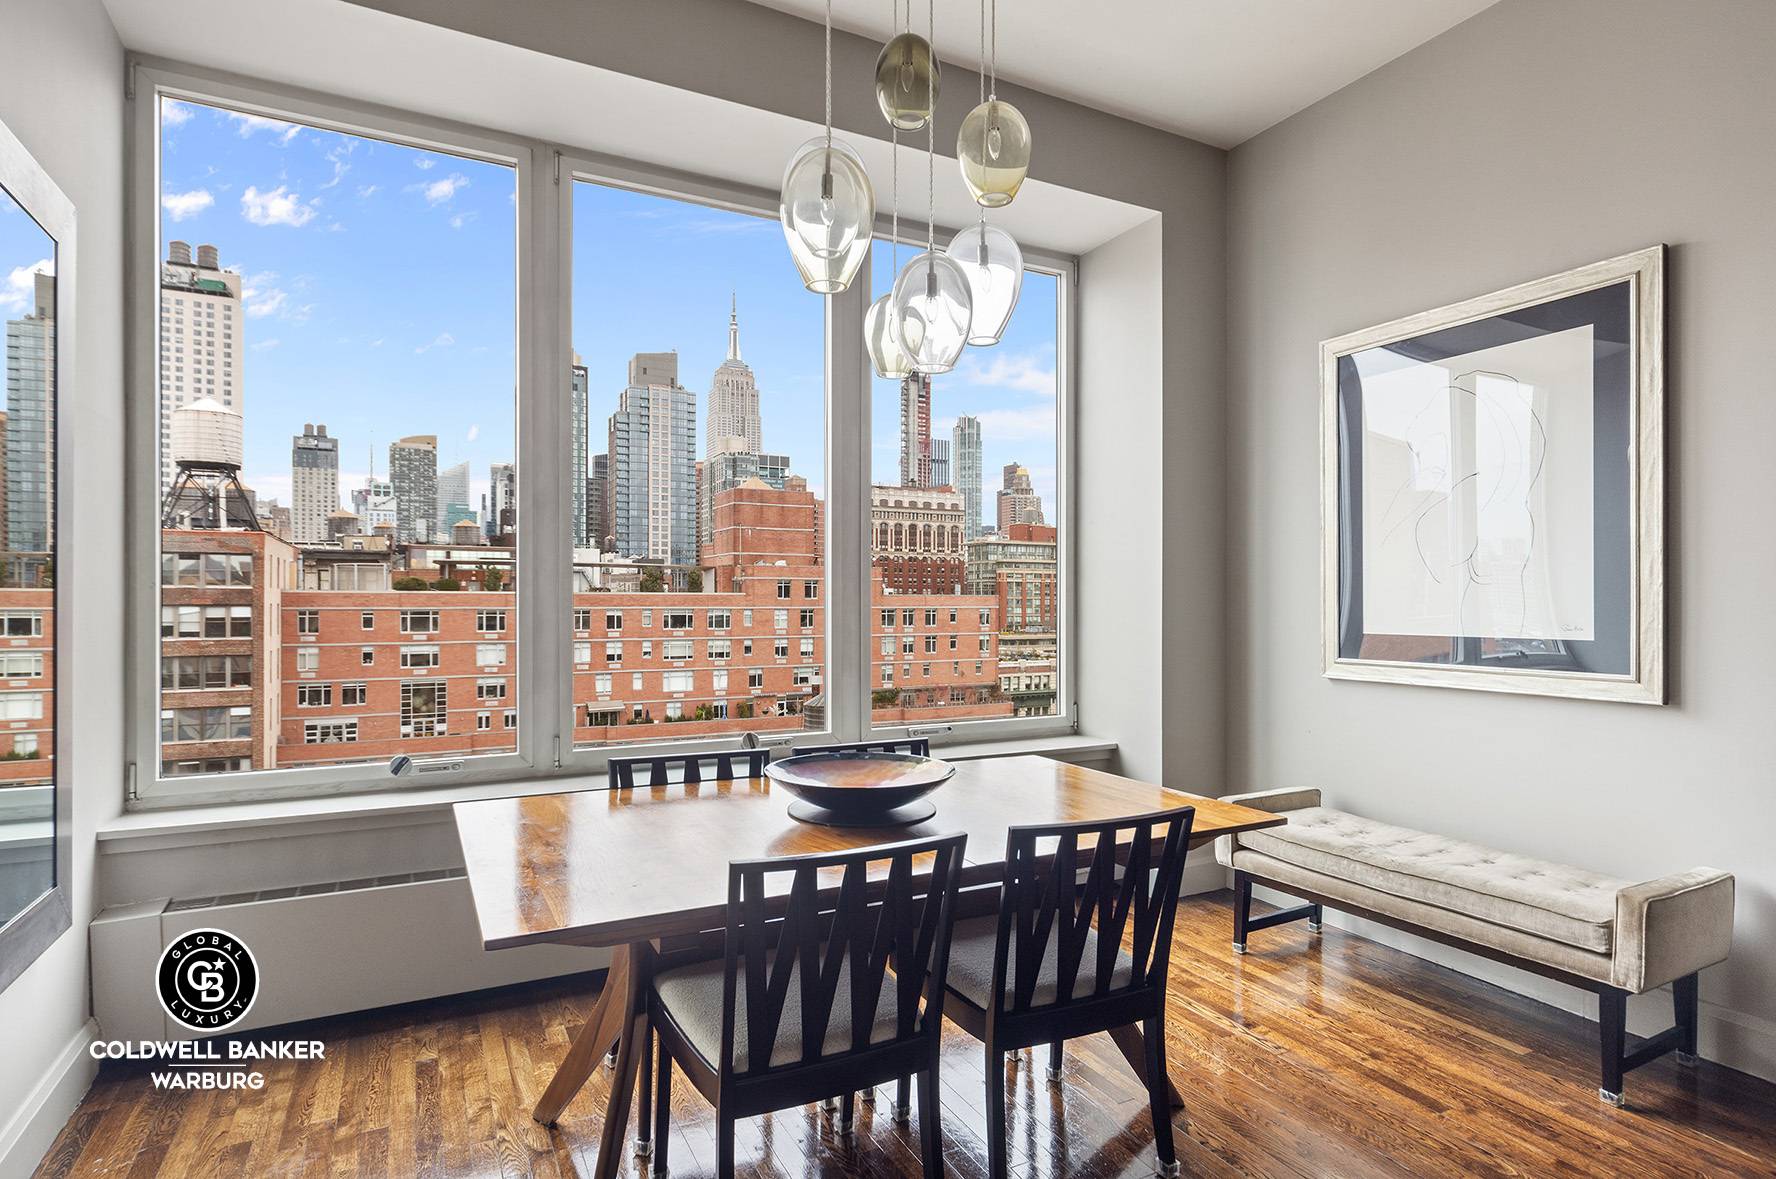 Introducing Penthouse E at the Lion s Head Condominium, a quiet, loft like 1, 800 square foot 2 bedroom office home with private outdoor terrace in the heart of Chelsea.